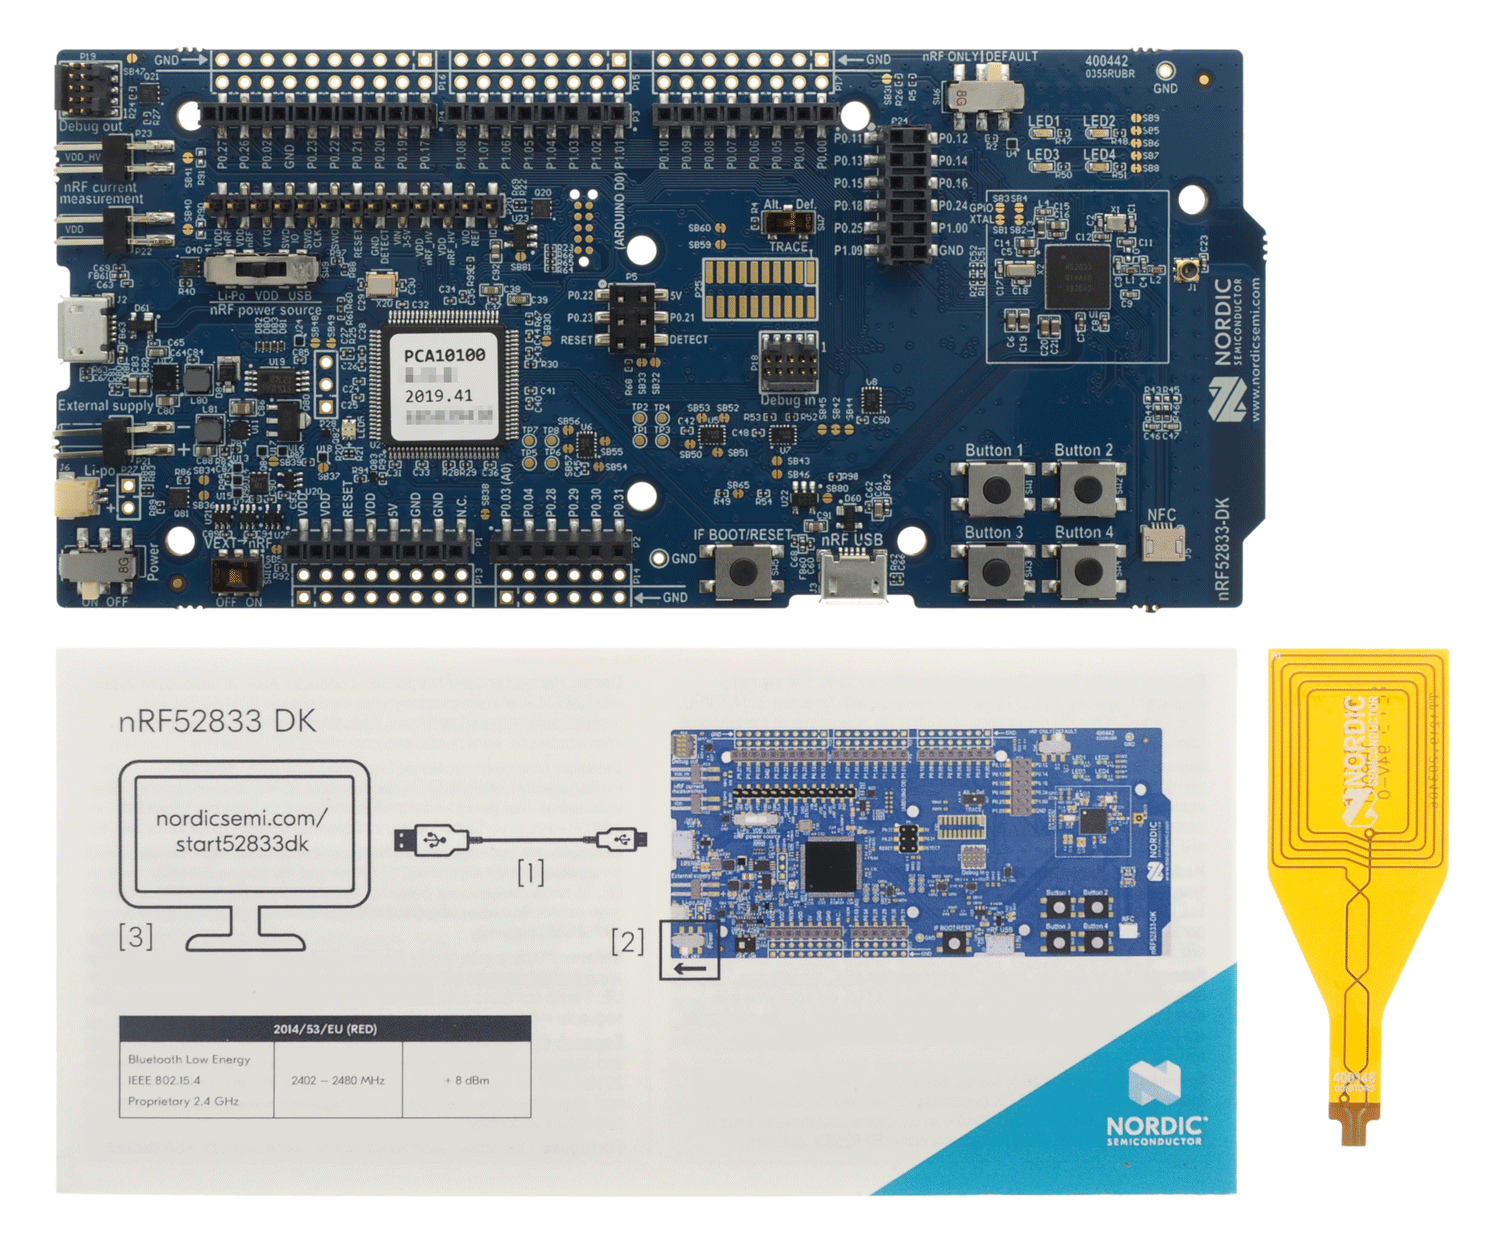 nRF52833 DK (PCA10100) and NFC antenna